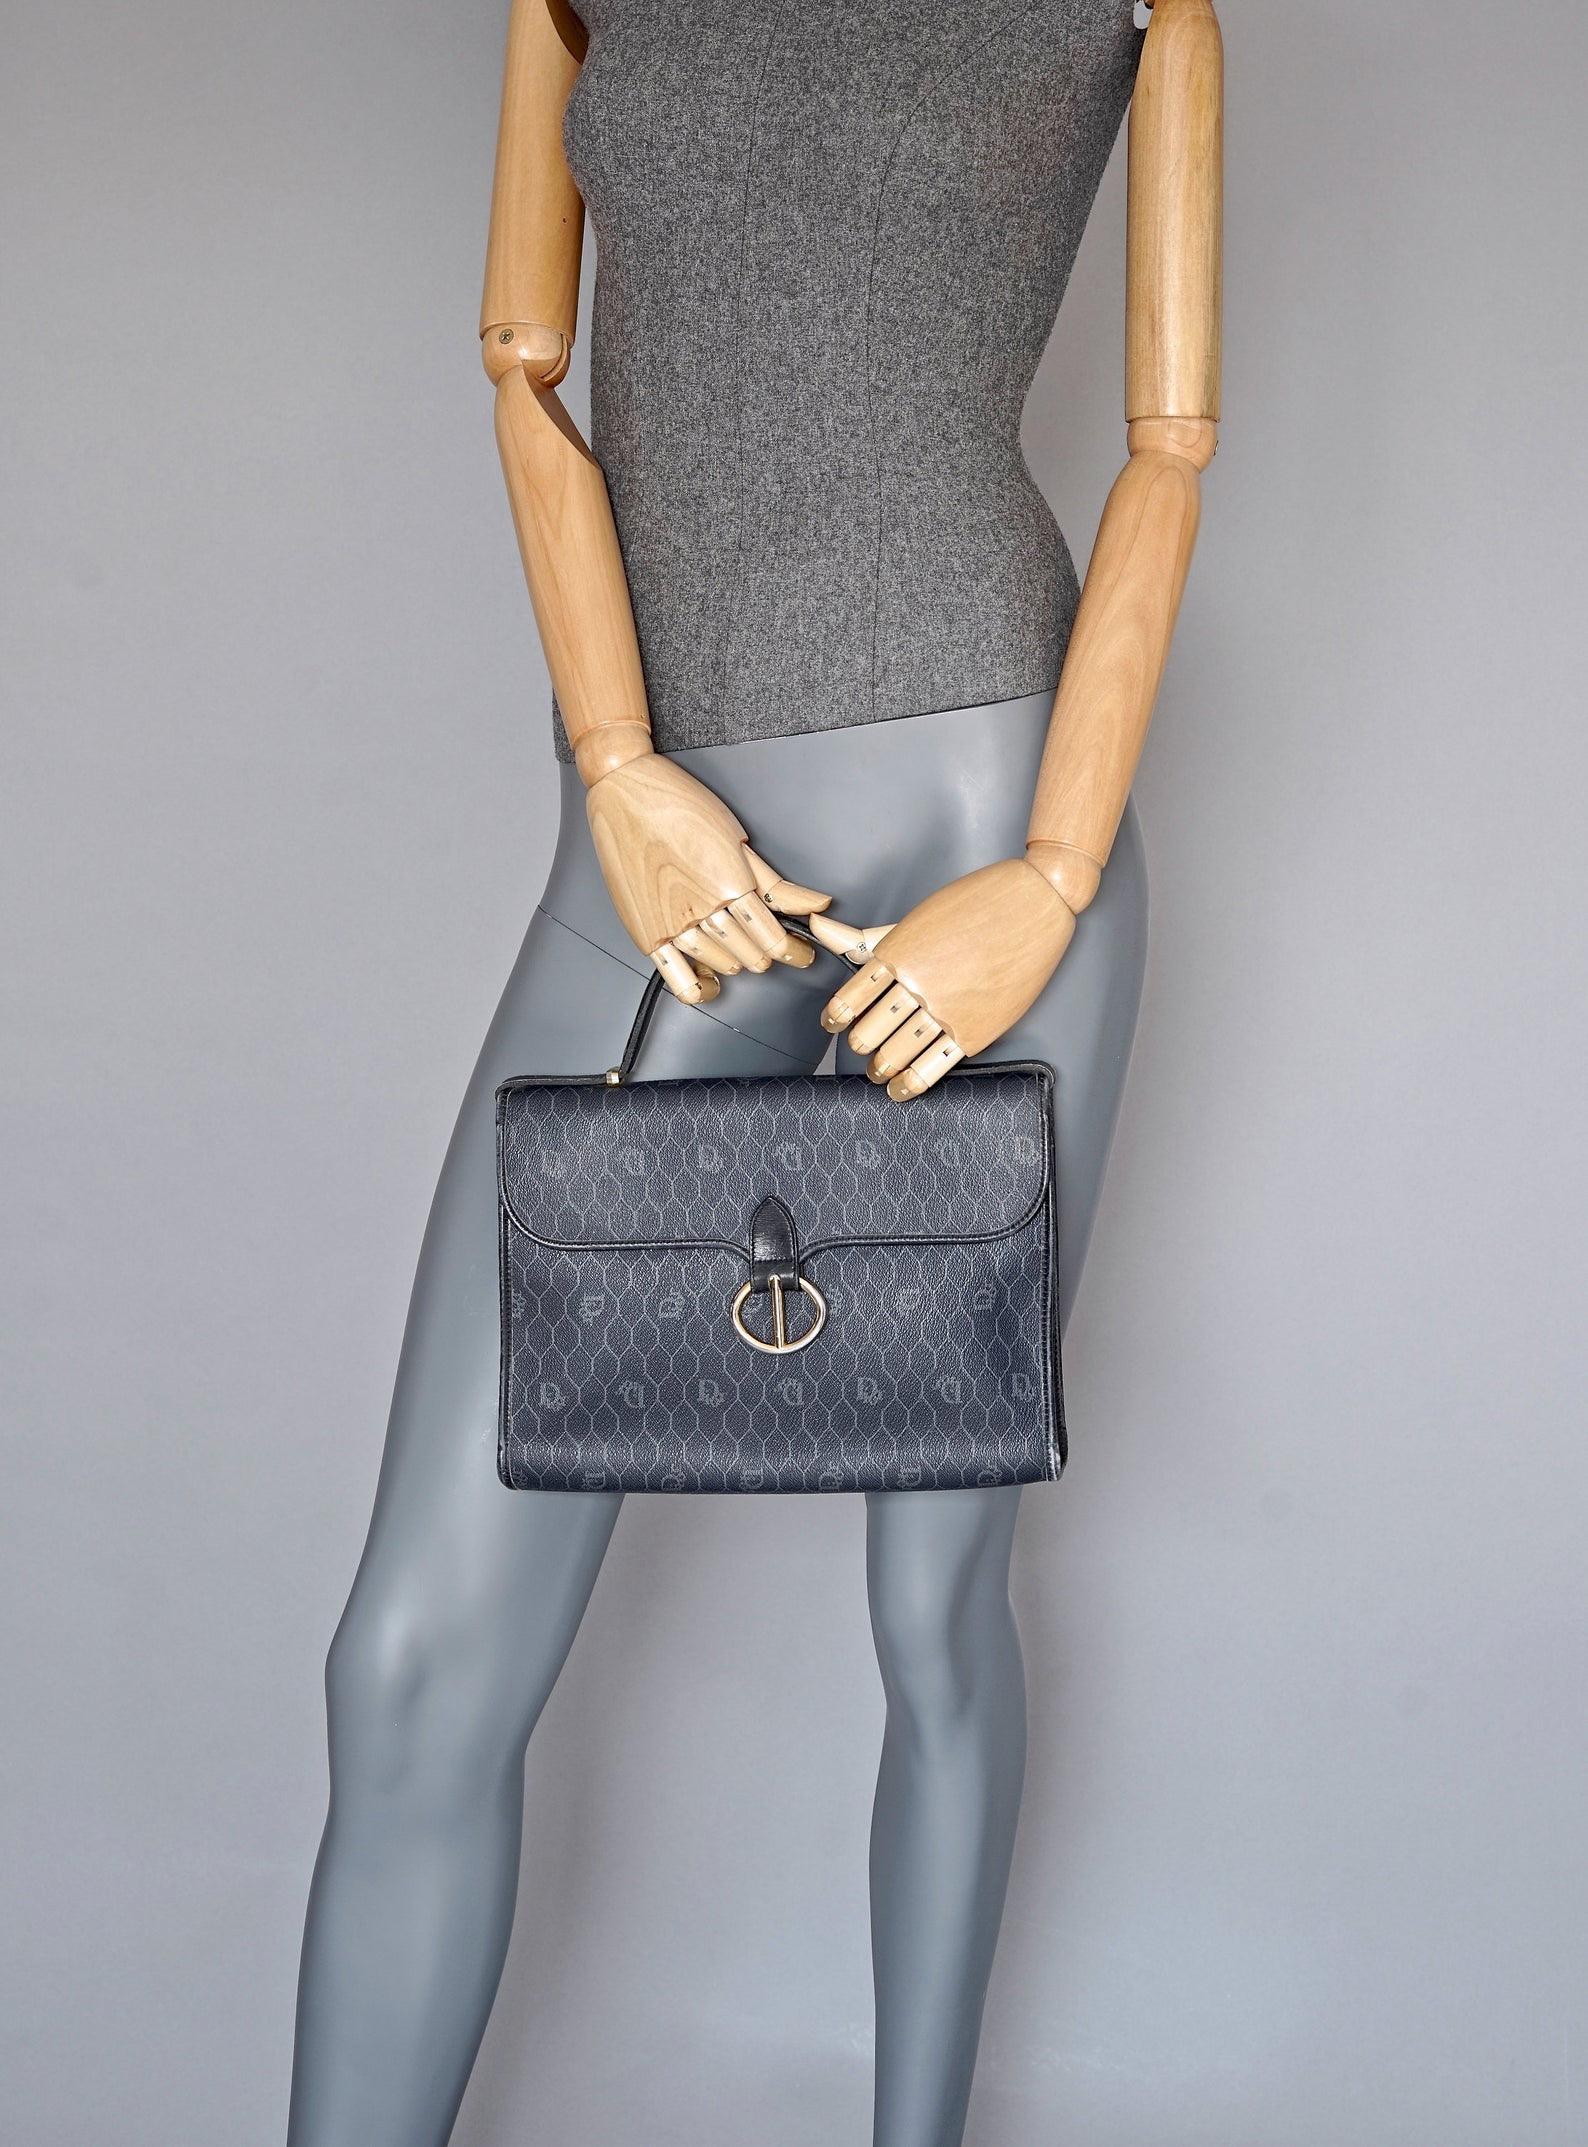 Vintage CHRISTIAN DIOR Logo Honeycomb Coated Monogram Top Handle Navy Blue Bag

Measurements:
Height: 8.07 inches (20.5 cm)
Width: 11.02 inches (28 cm)
Depth: 2.75 inches (7 cm)
Handle Strap: 9.45 inches (24 cm)

Features:
- 100% Authentic CHRISTIAN